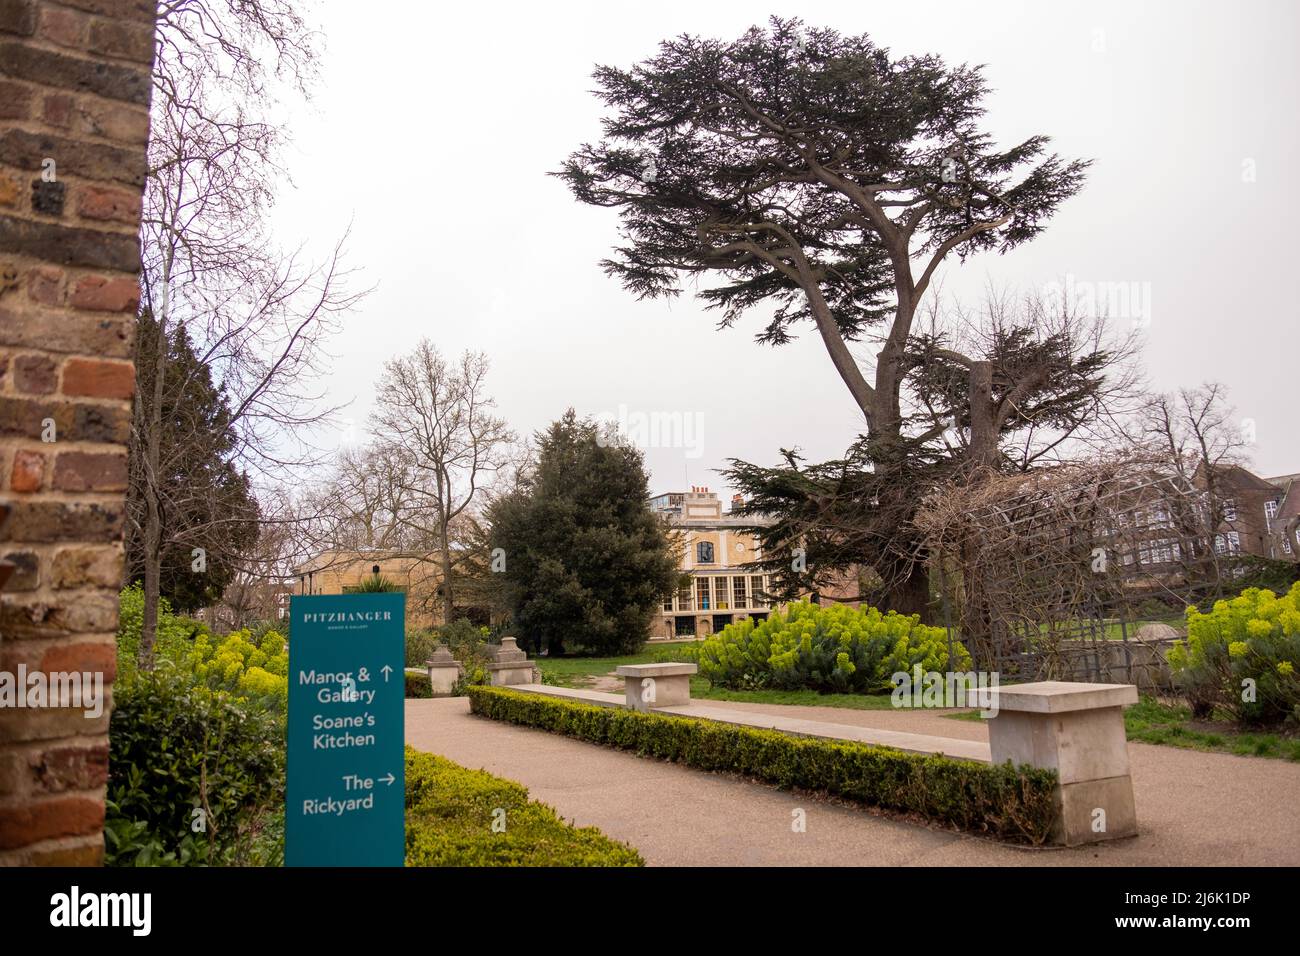 London- April 2022: Pizthanger Manor, a historic house in Ealing, west London- recently reopened as a local attraction with gallery and grounds Stock Photo